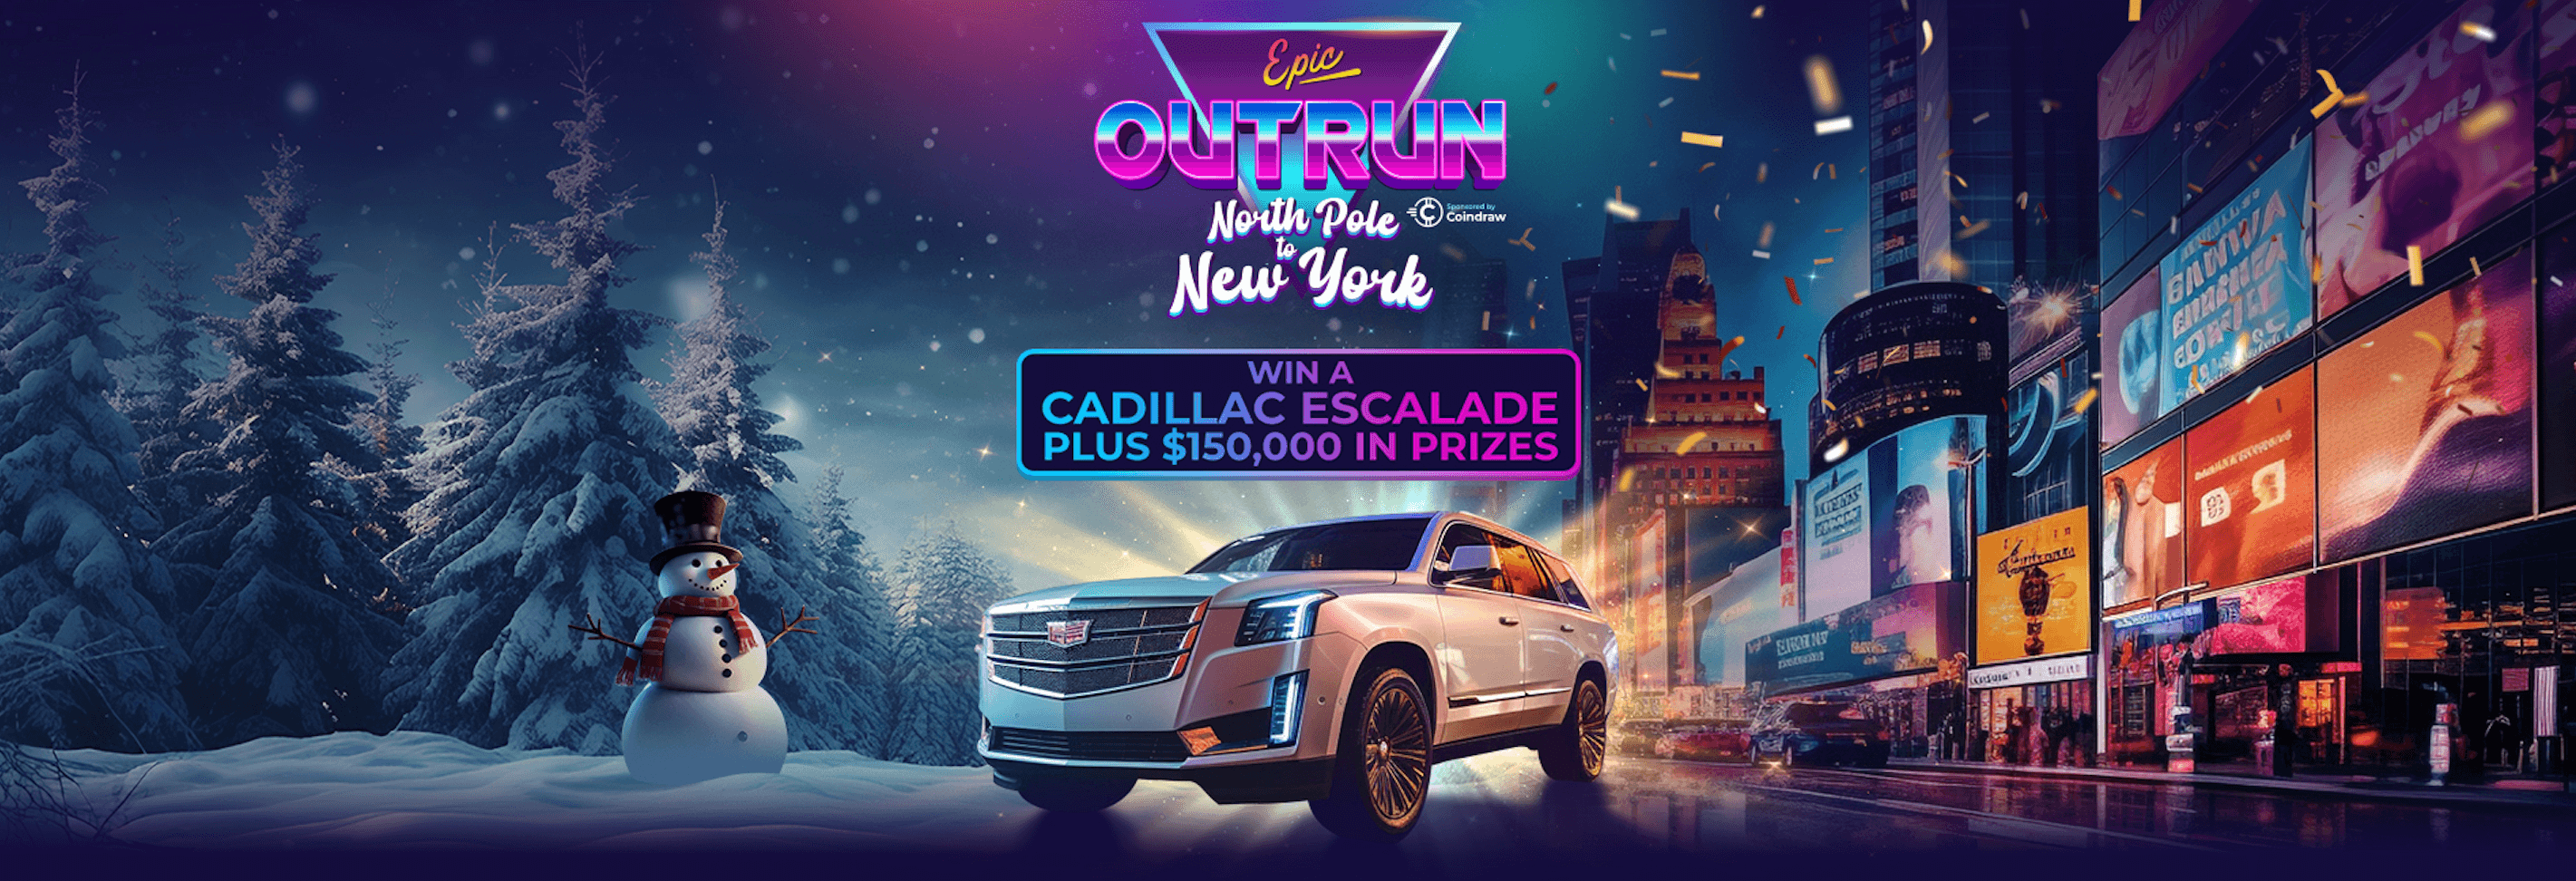 new-epic-outrun-live-at-slots-of-vegas